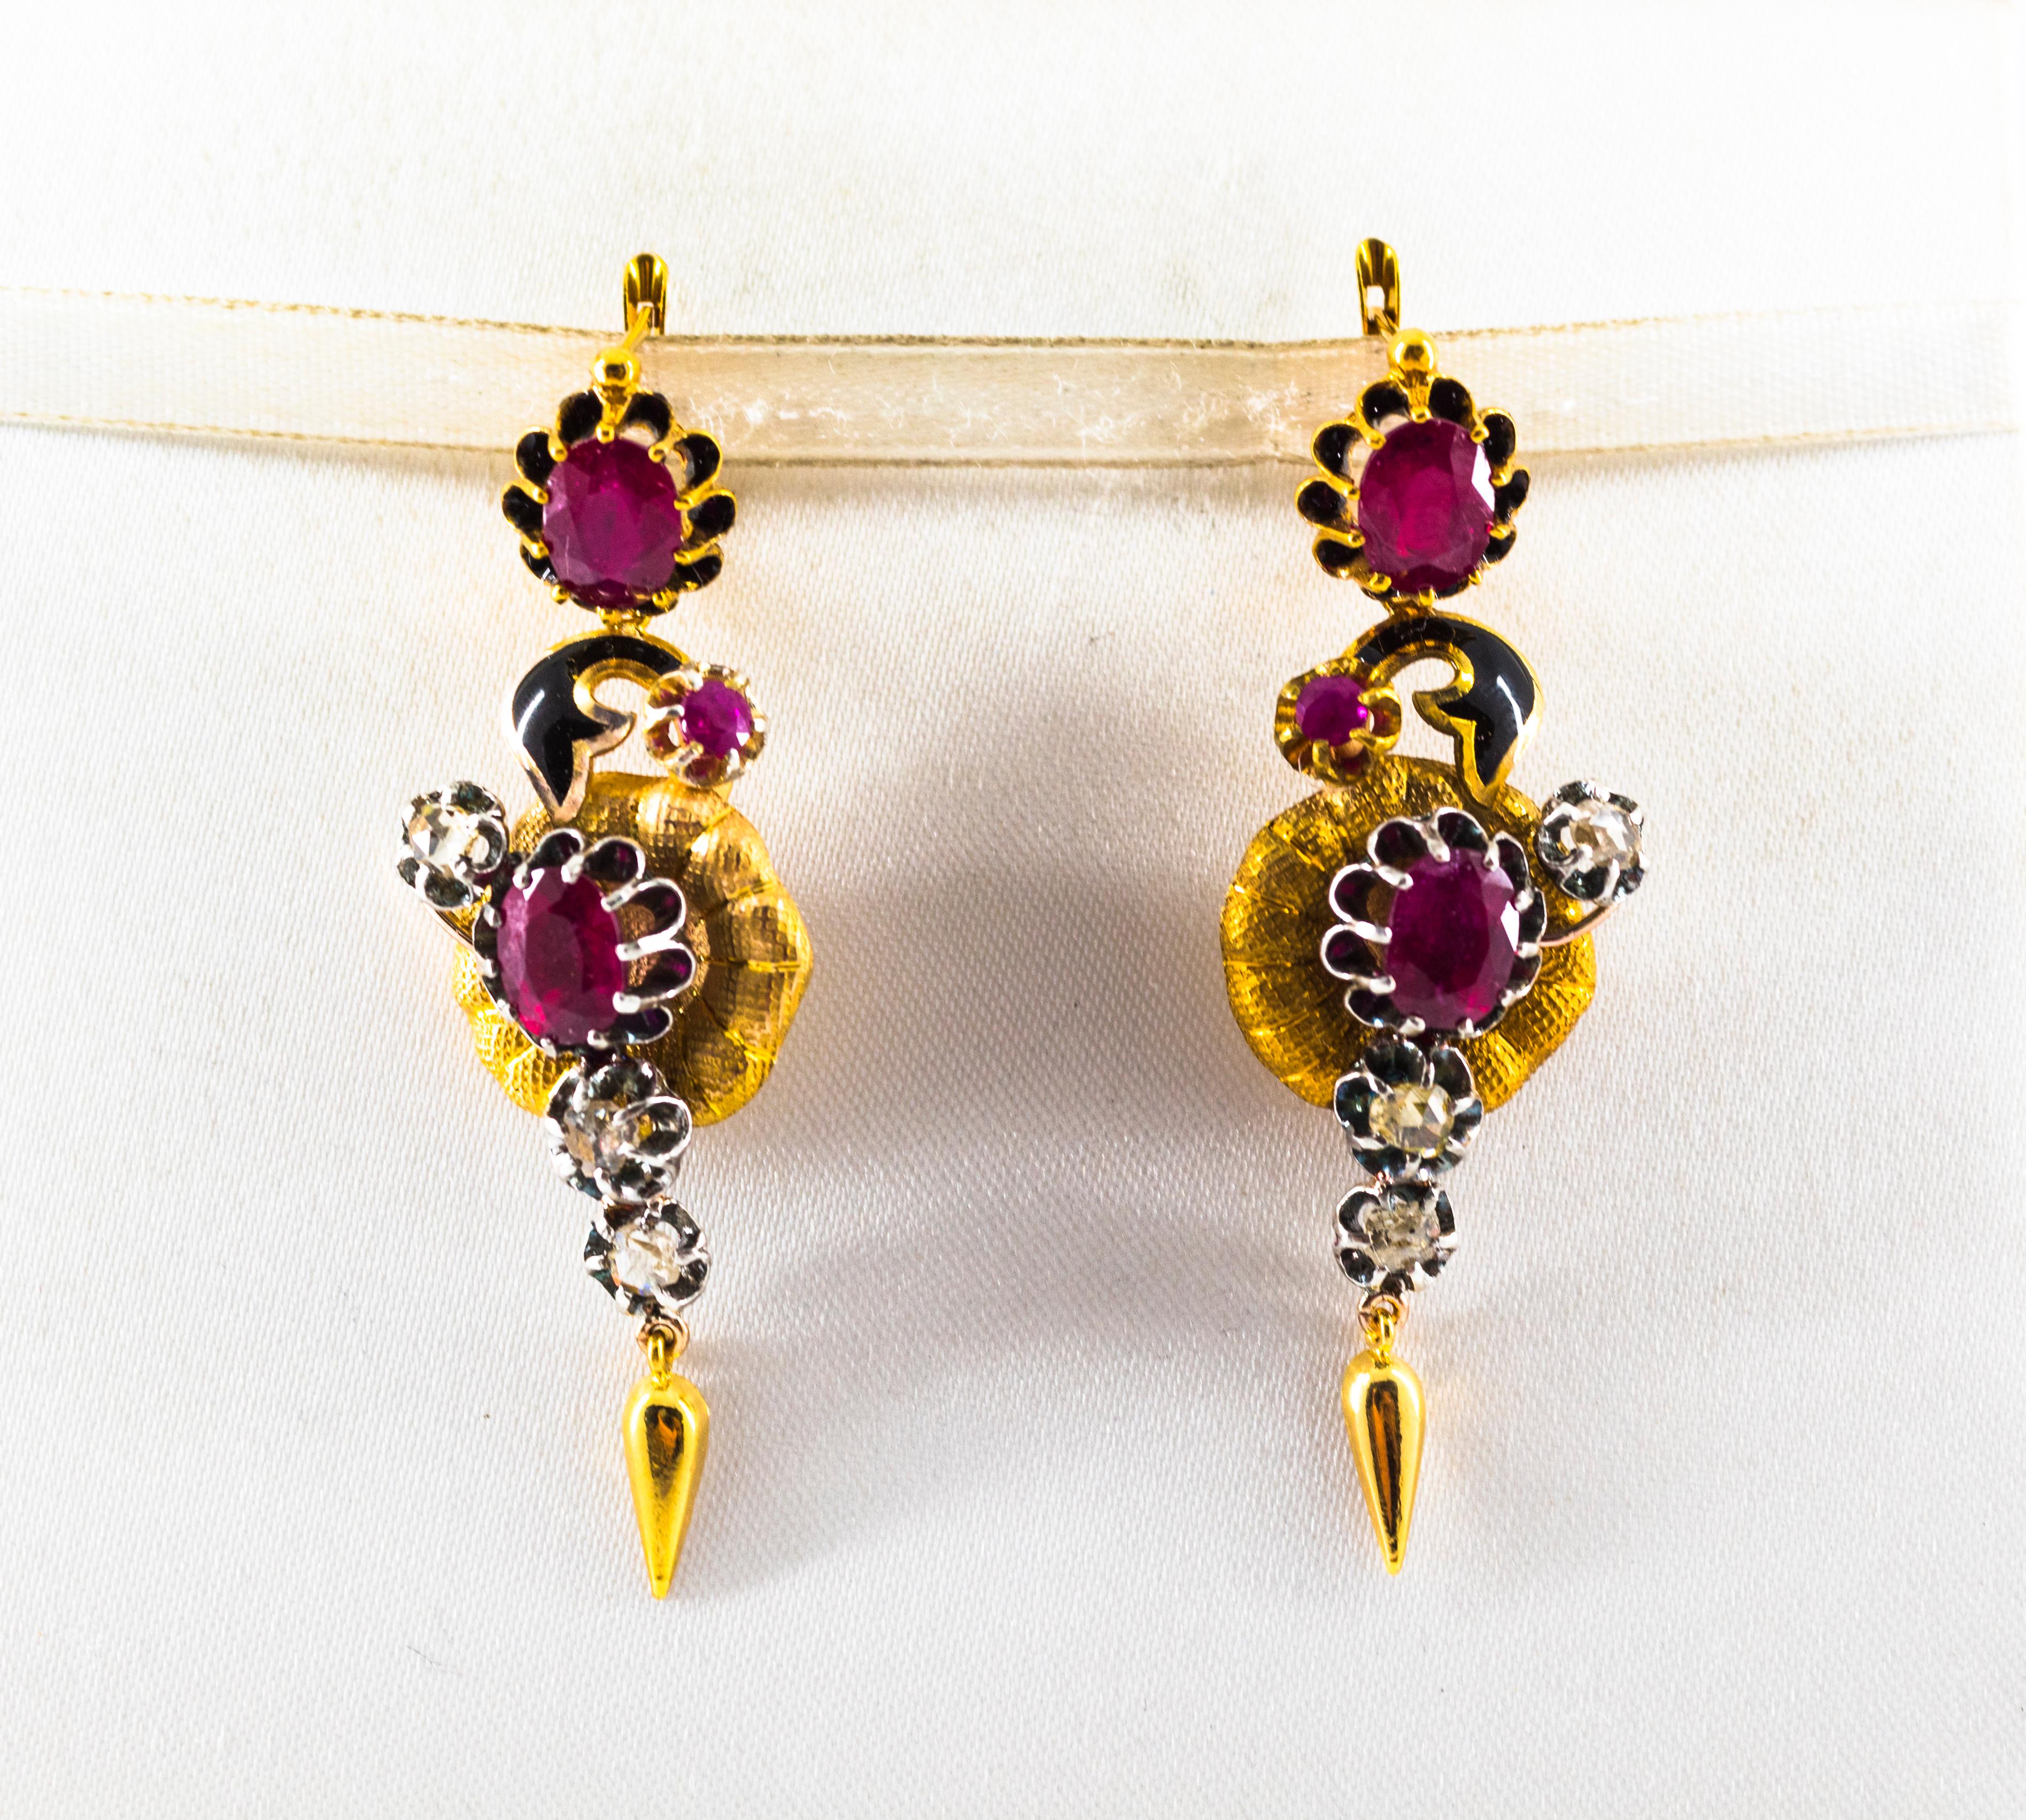 These Lever-Back Earrings are made of 9K Yellow Gold and Sterling Silver.
These Earrings have 0.90 Carats of White Rose Cut Diamonds.
These Earrings have 4.00 Carats of Rubies.
These Earrings have also Black Enamel.
All our Earrings have pins for